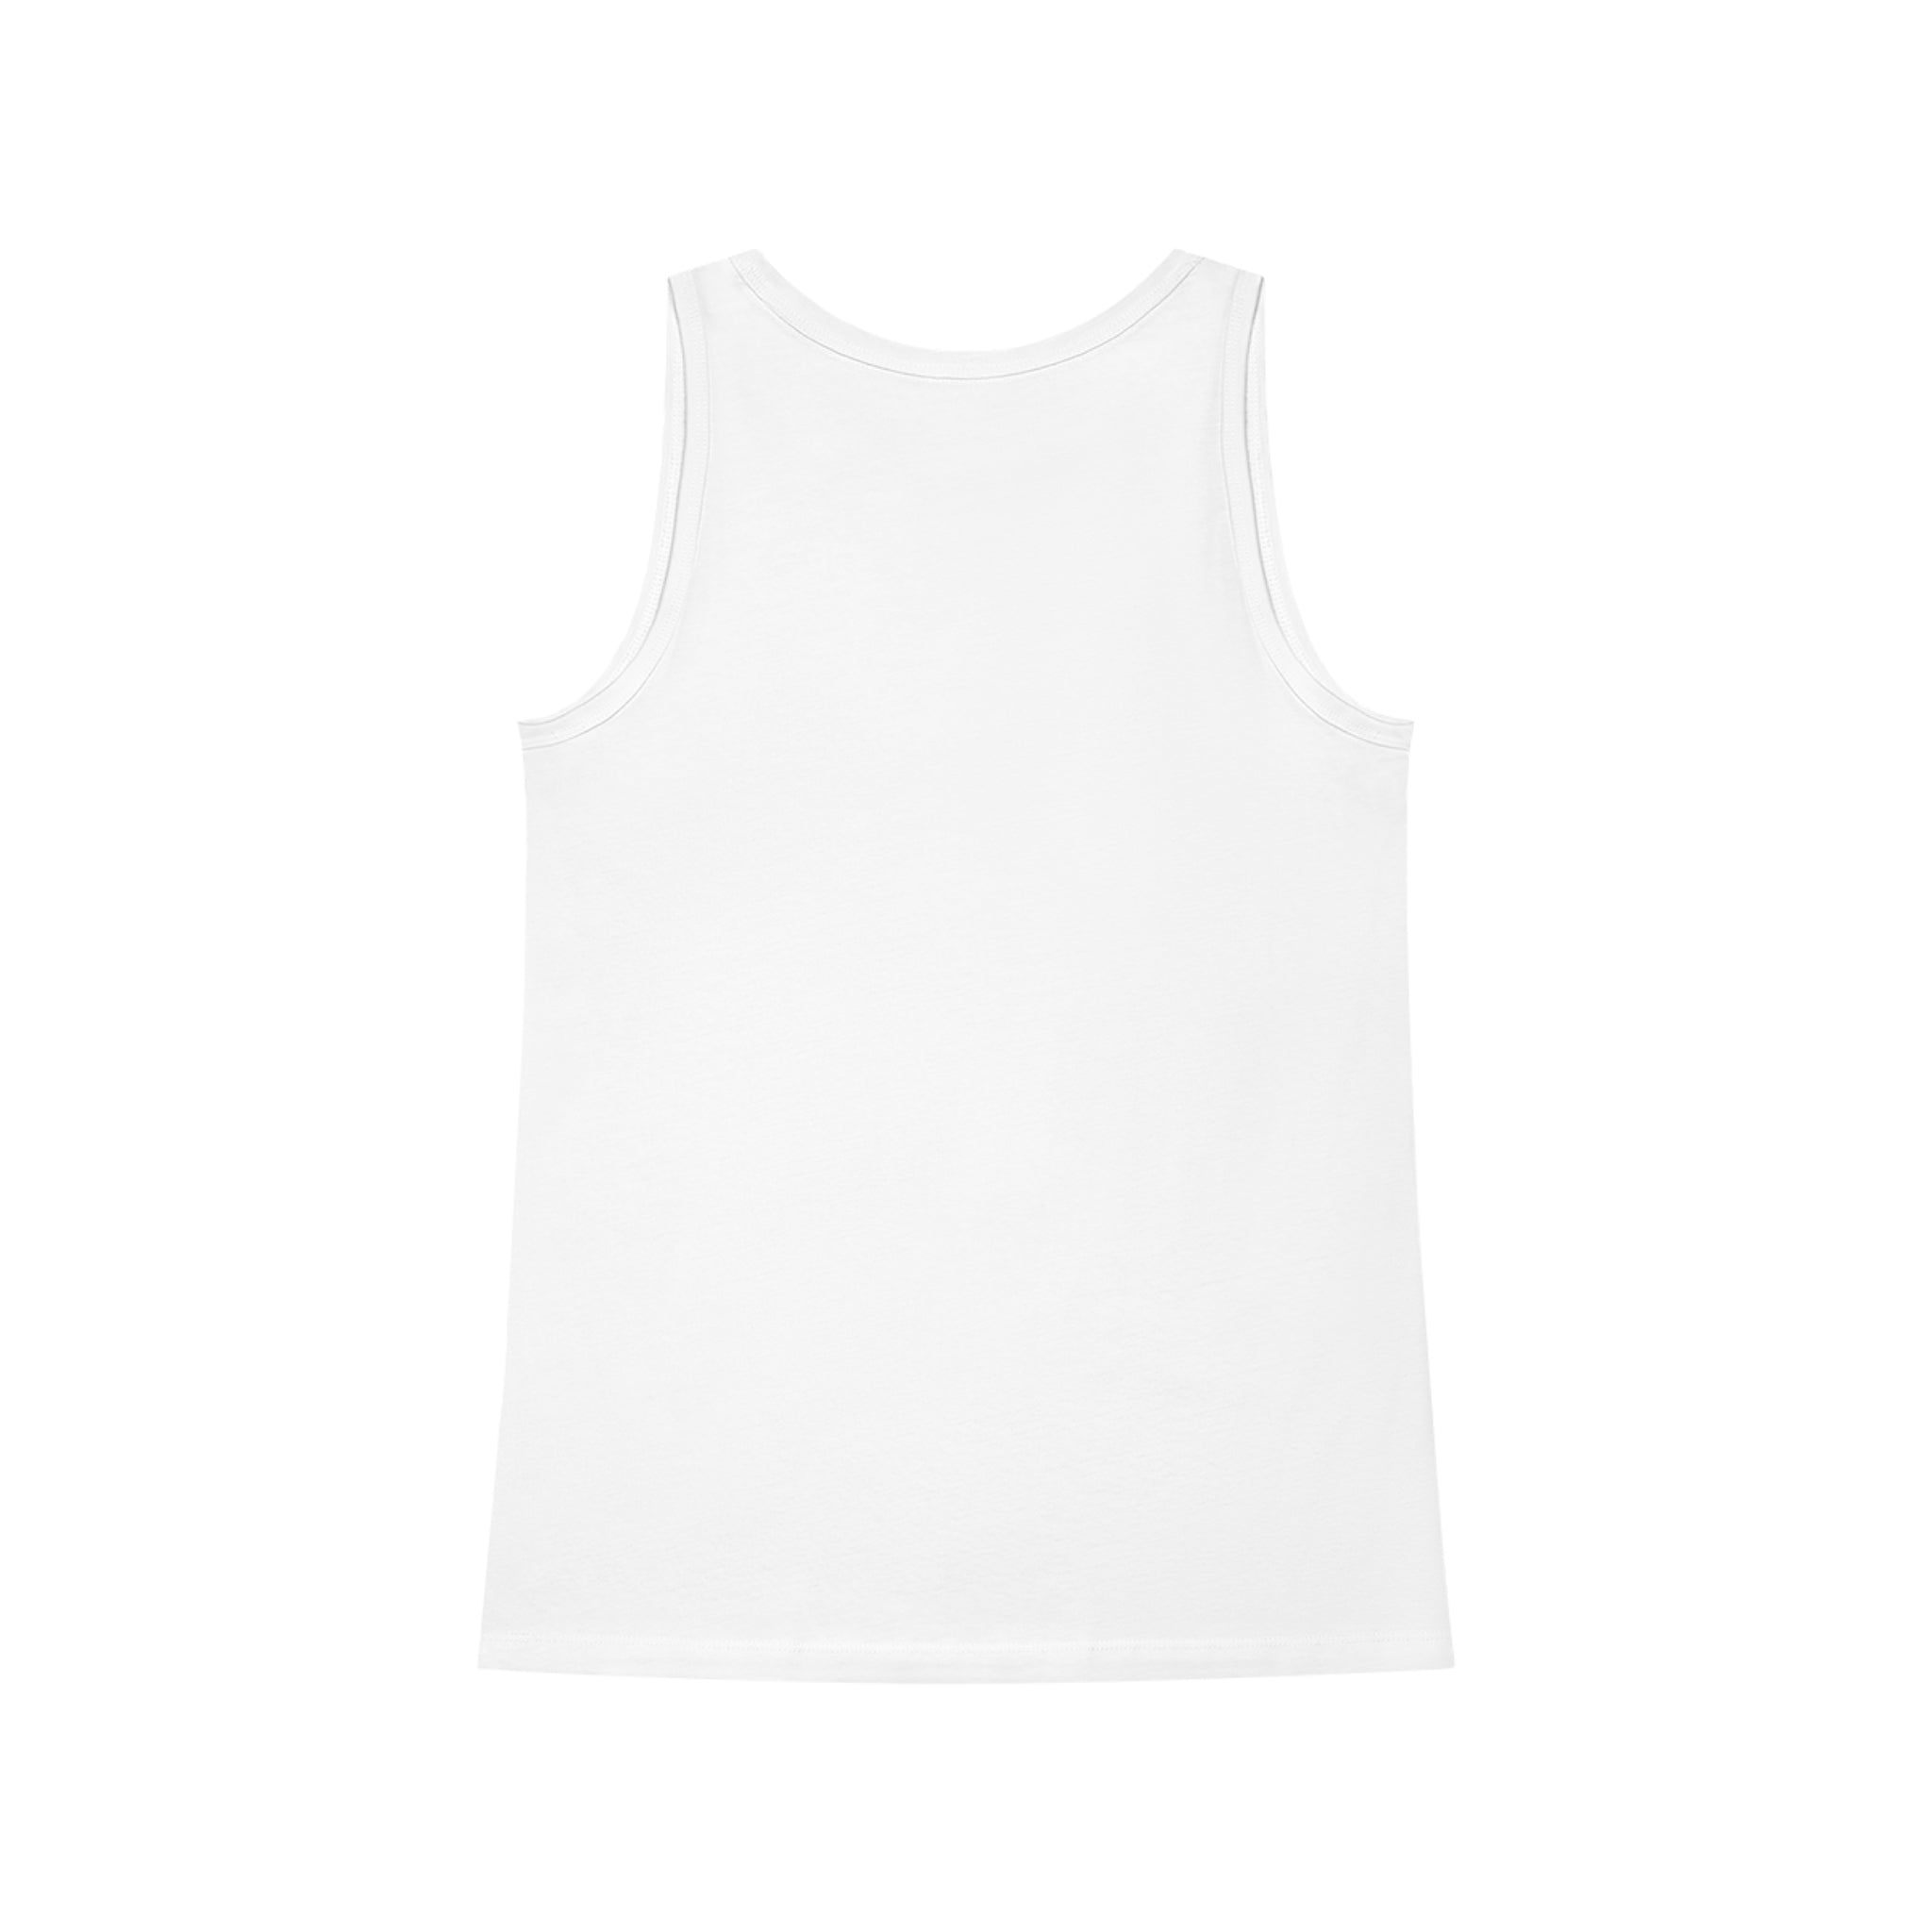 A Flower Red Tank Top on a white background.